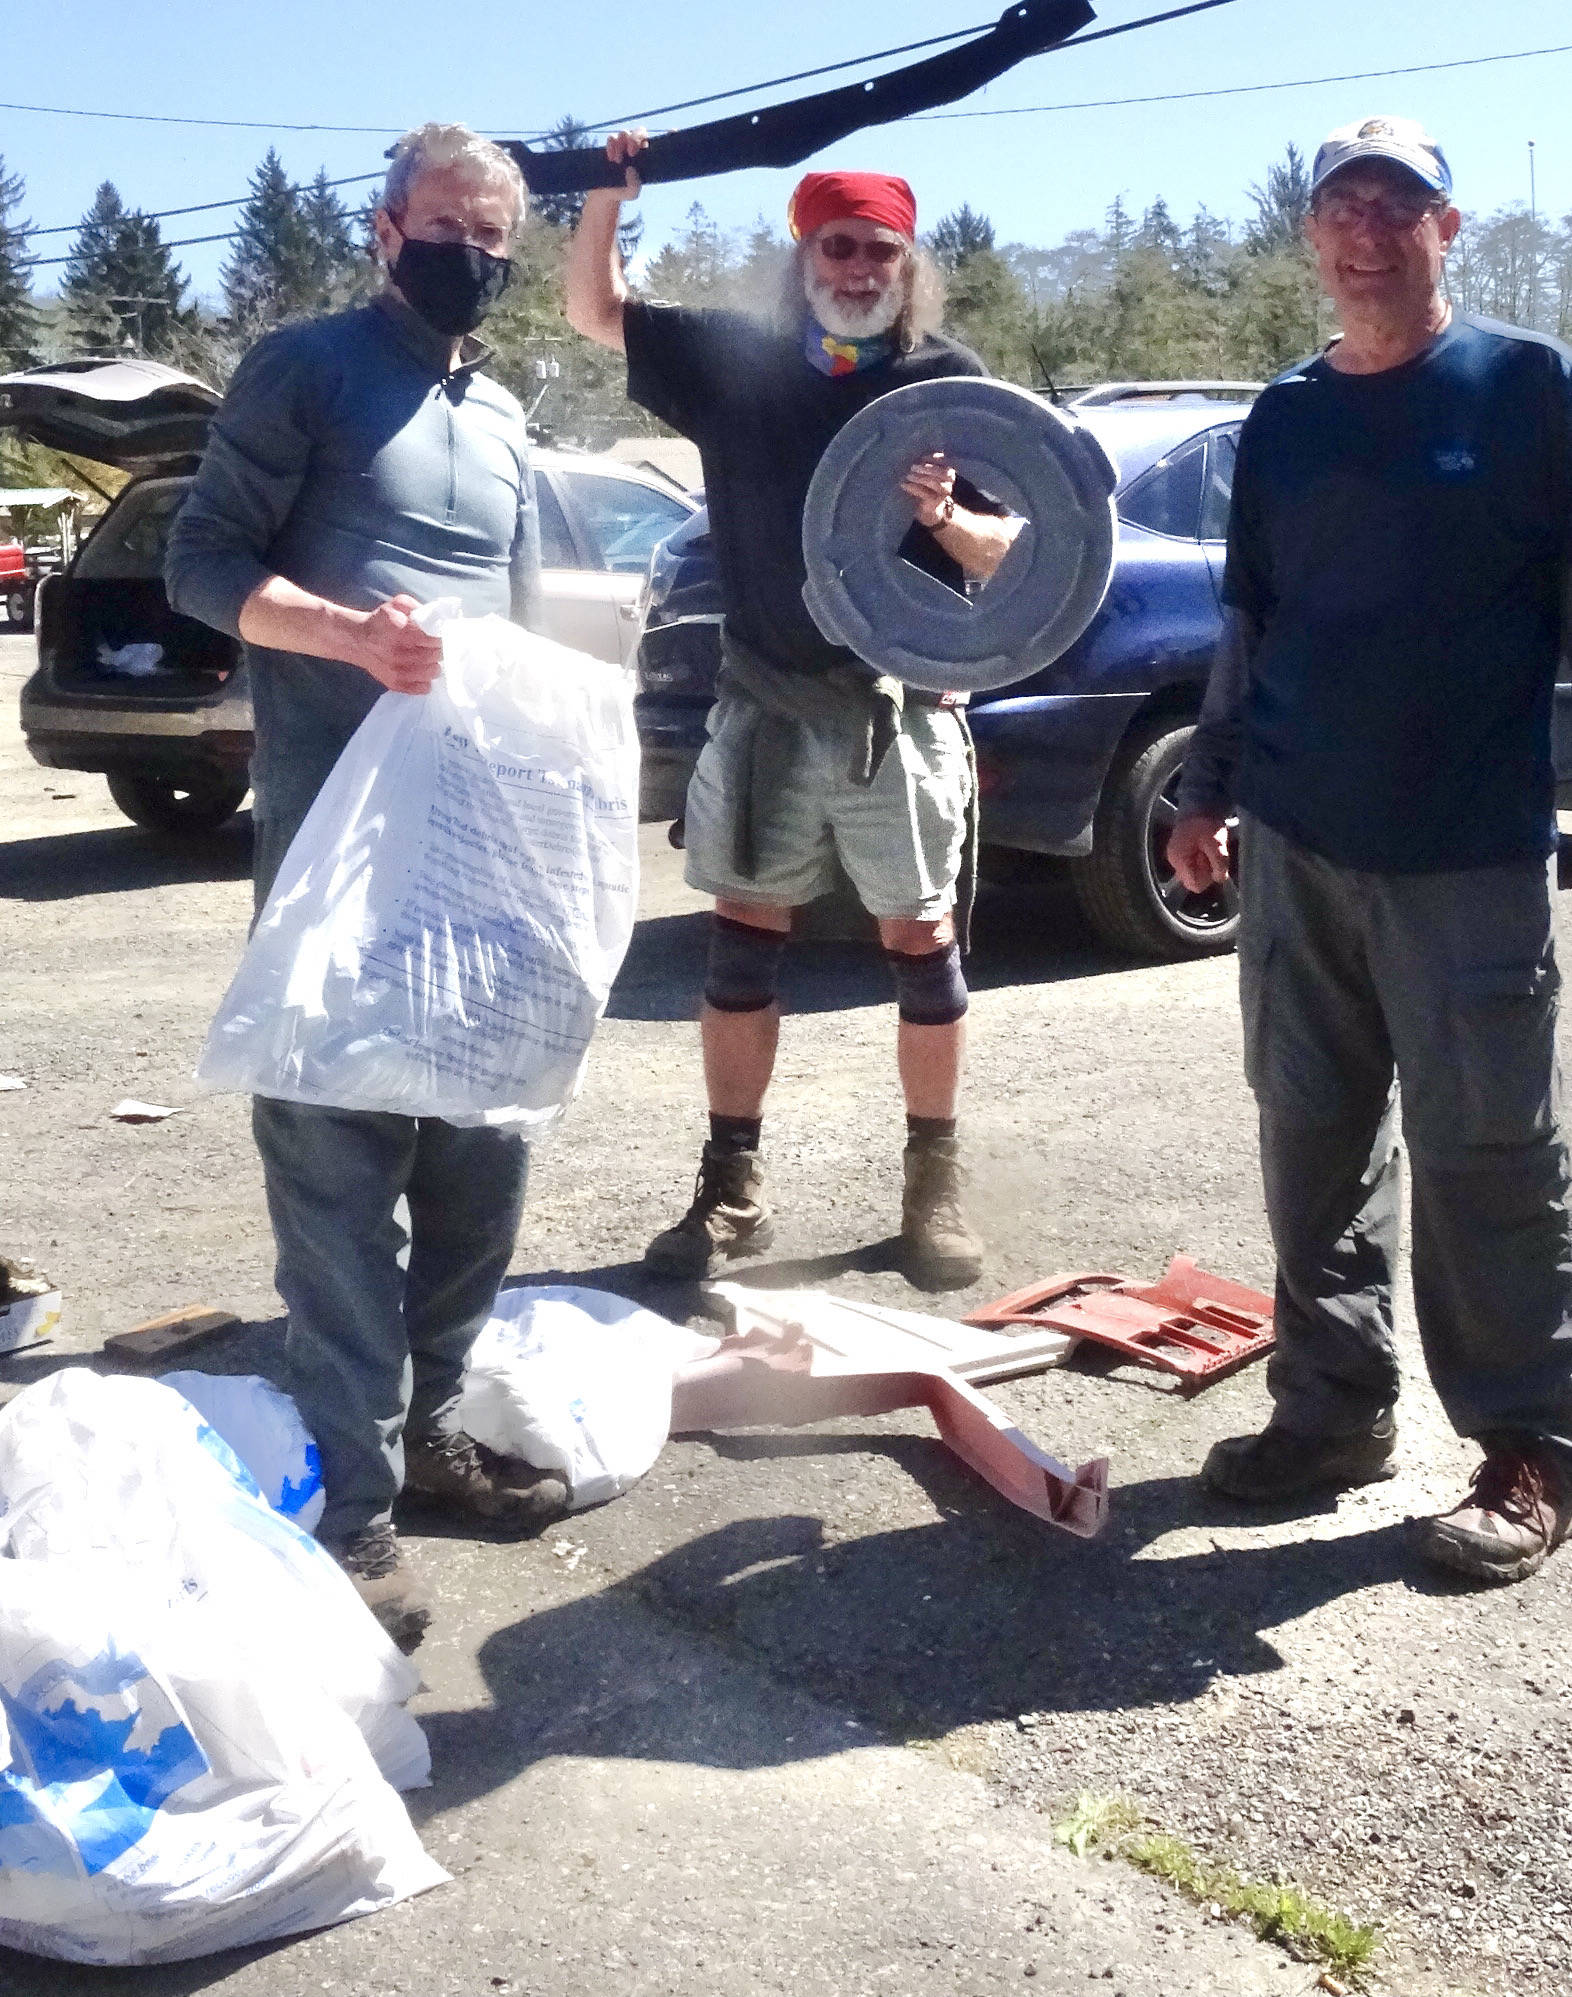 Three volunteers from Oregon, Bob, Mark, and Randy, camped at Cape Alava and drove to Pillar Point to pick up marine debris.